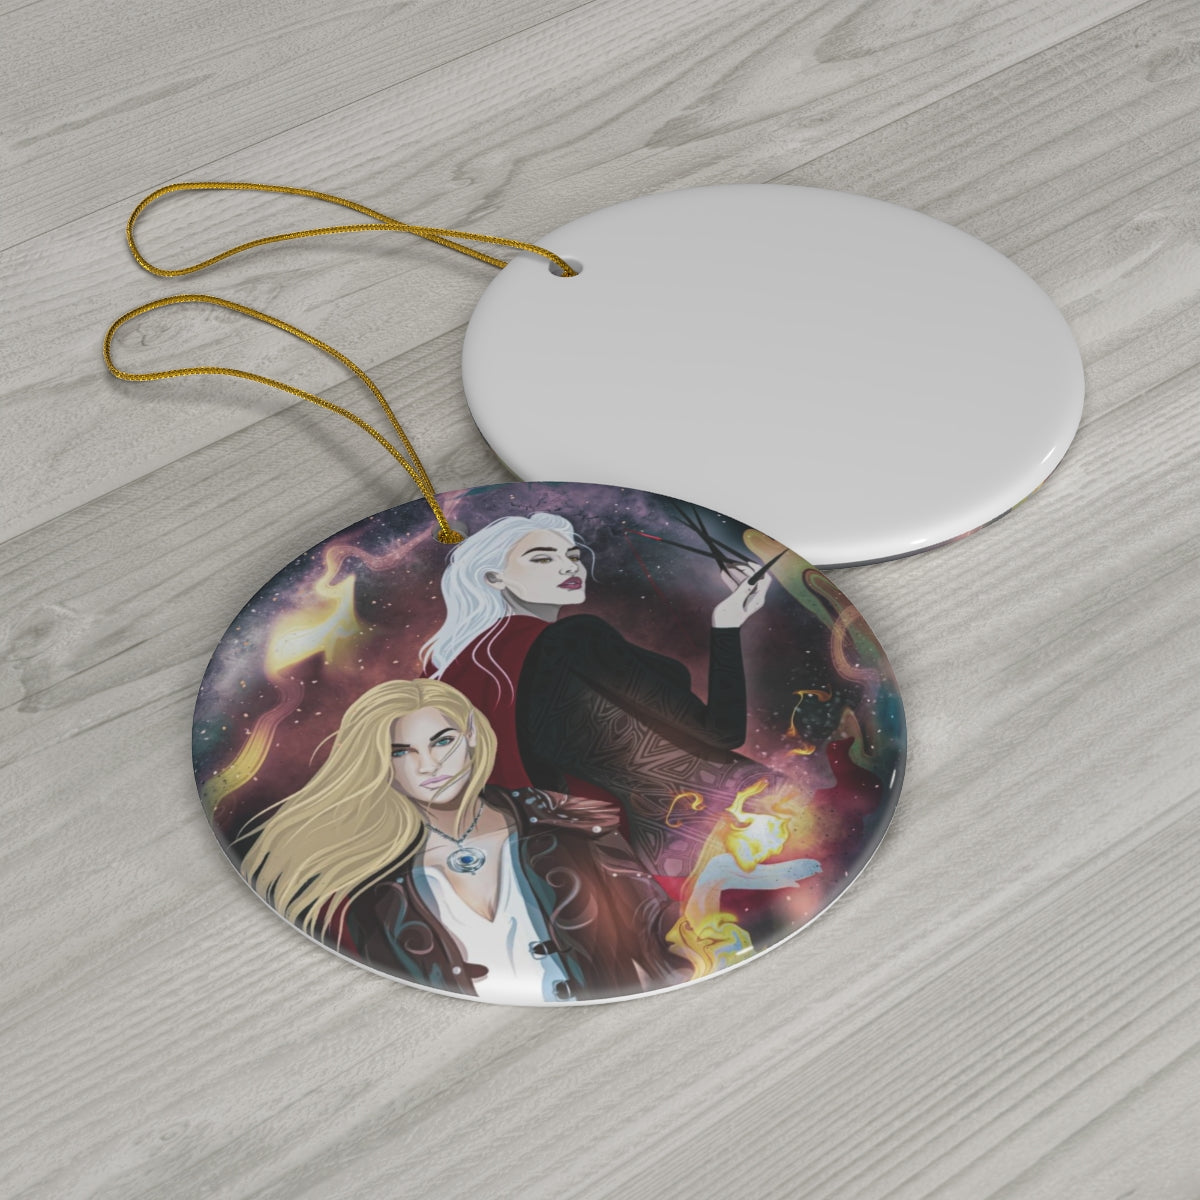 Aelin and Manon Tree Ornament Bookish Merch SJM Gift for Her Best Friend Gift Ideas Gift Topper Sarah J Maas Fan Art Book Characters